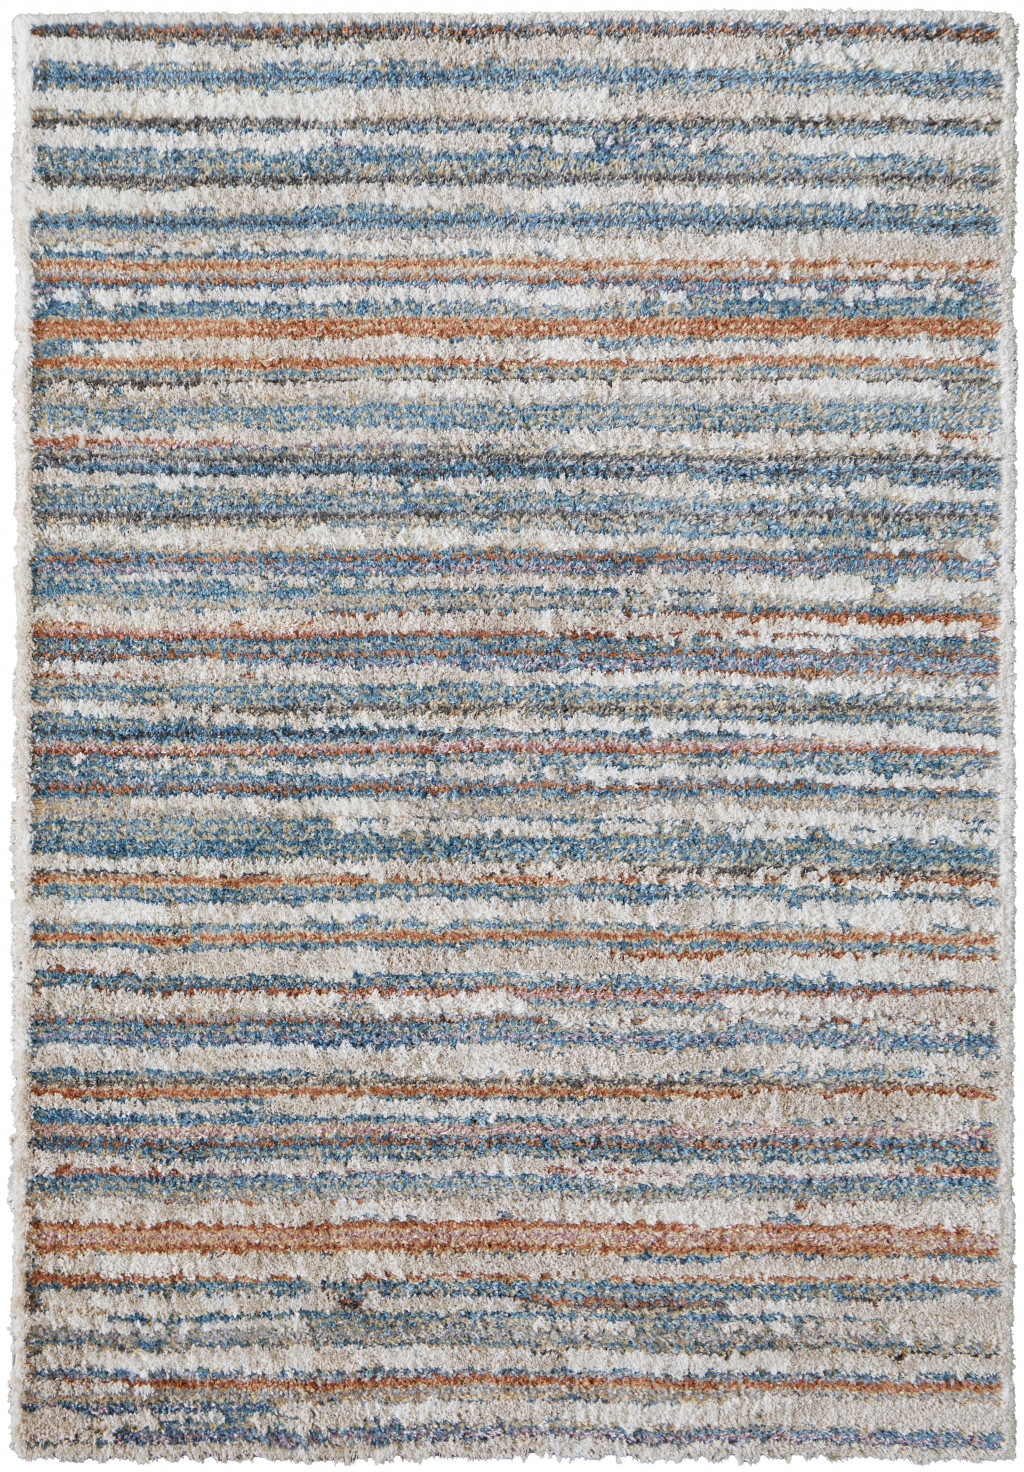 2' X 3' Ivory Blue And Orange Striped Power Loom Stain Resistant Area Rug-514533-1